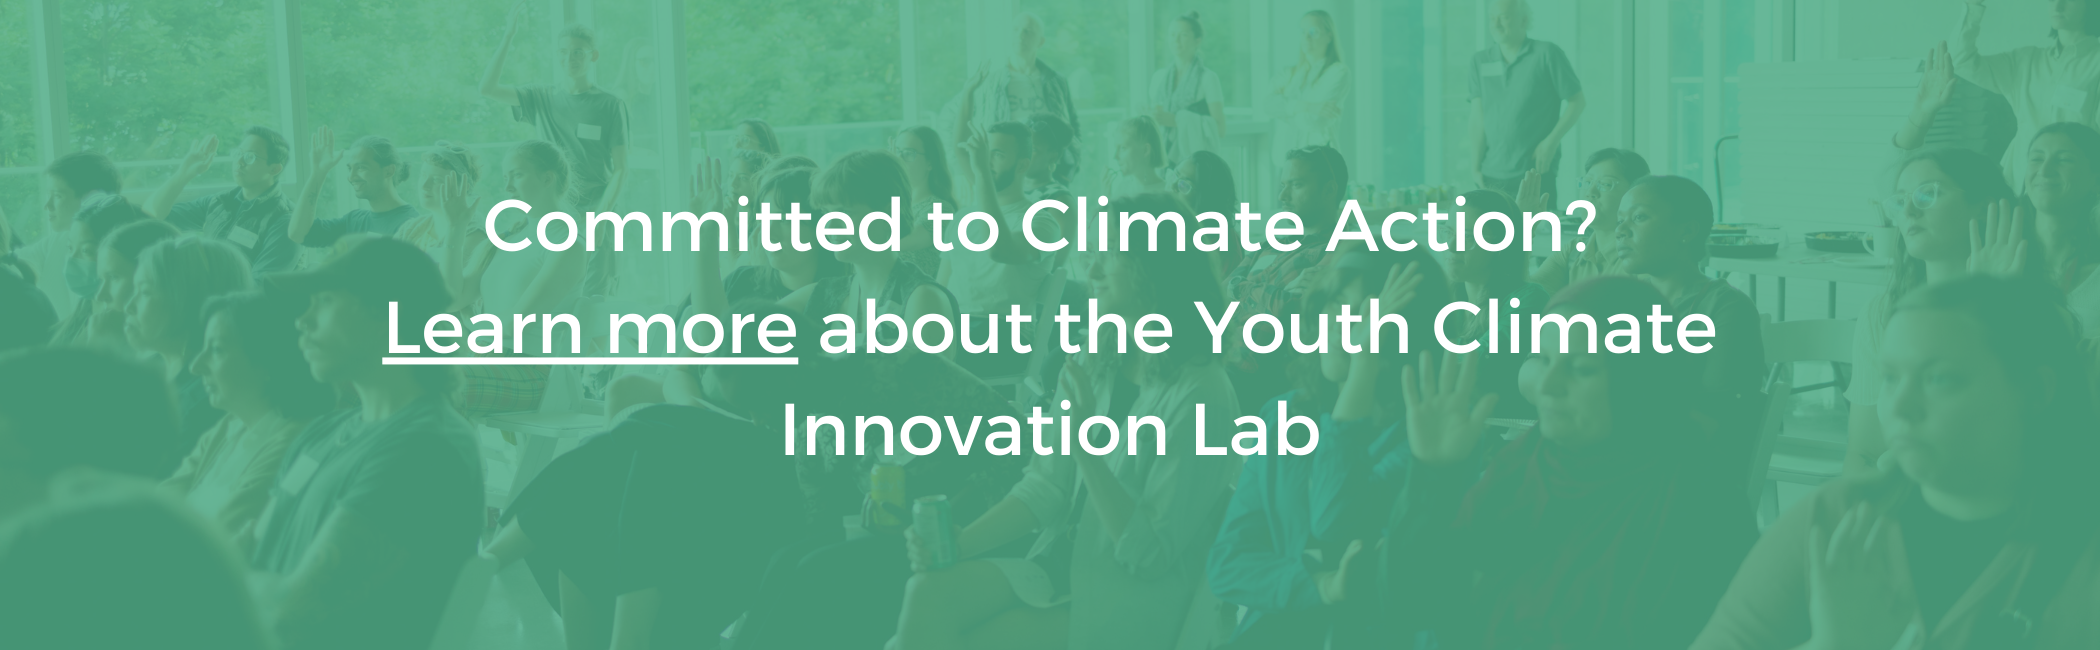 White text on teal background that reads "Committed to climate action? Learn more about the Youth Climate Innovation Lab". In the background there is a group of people with several raised hands.